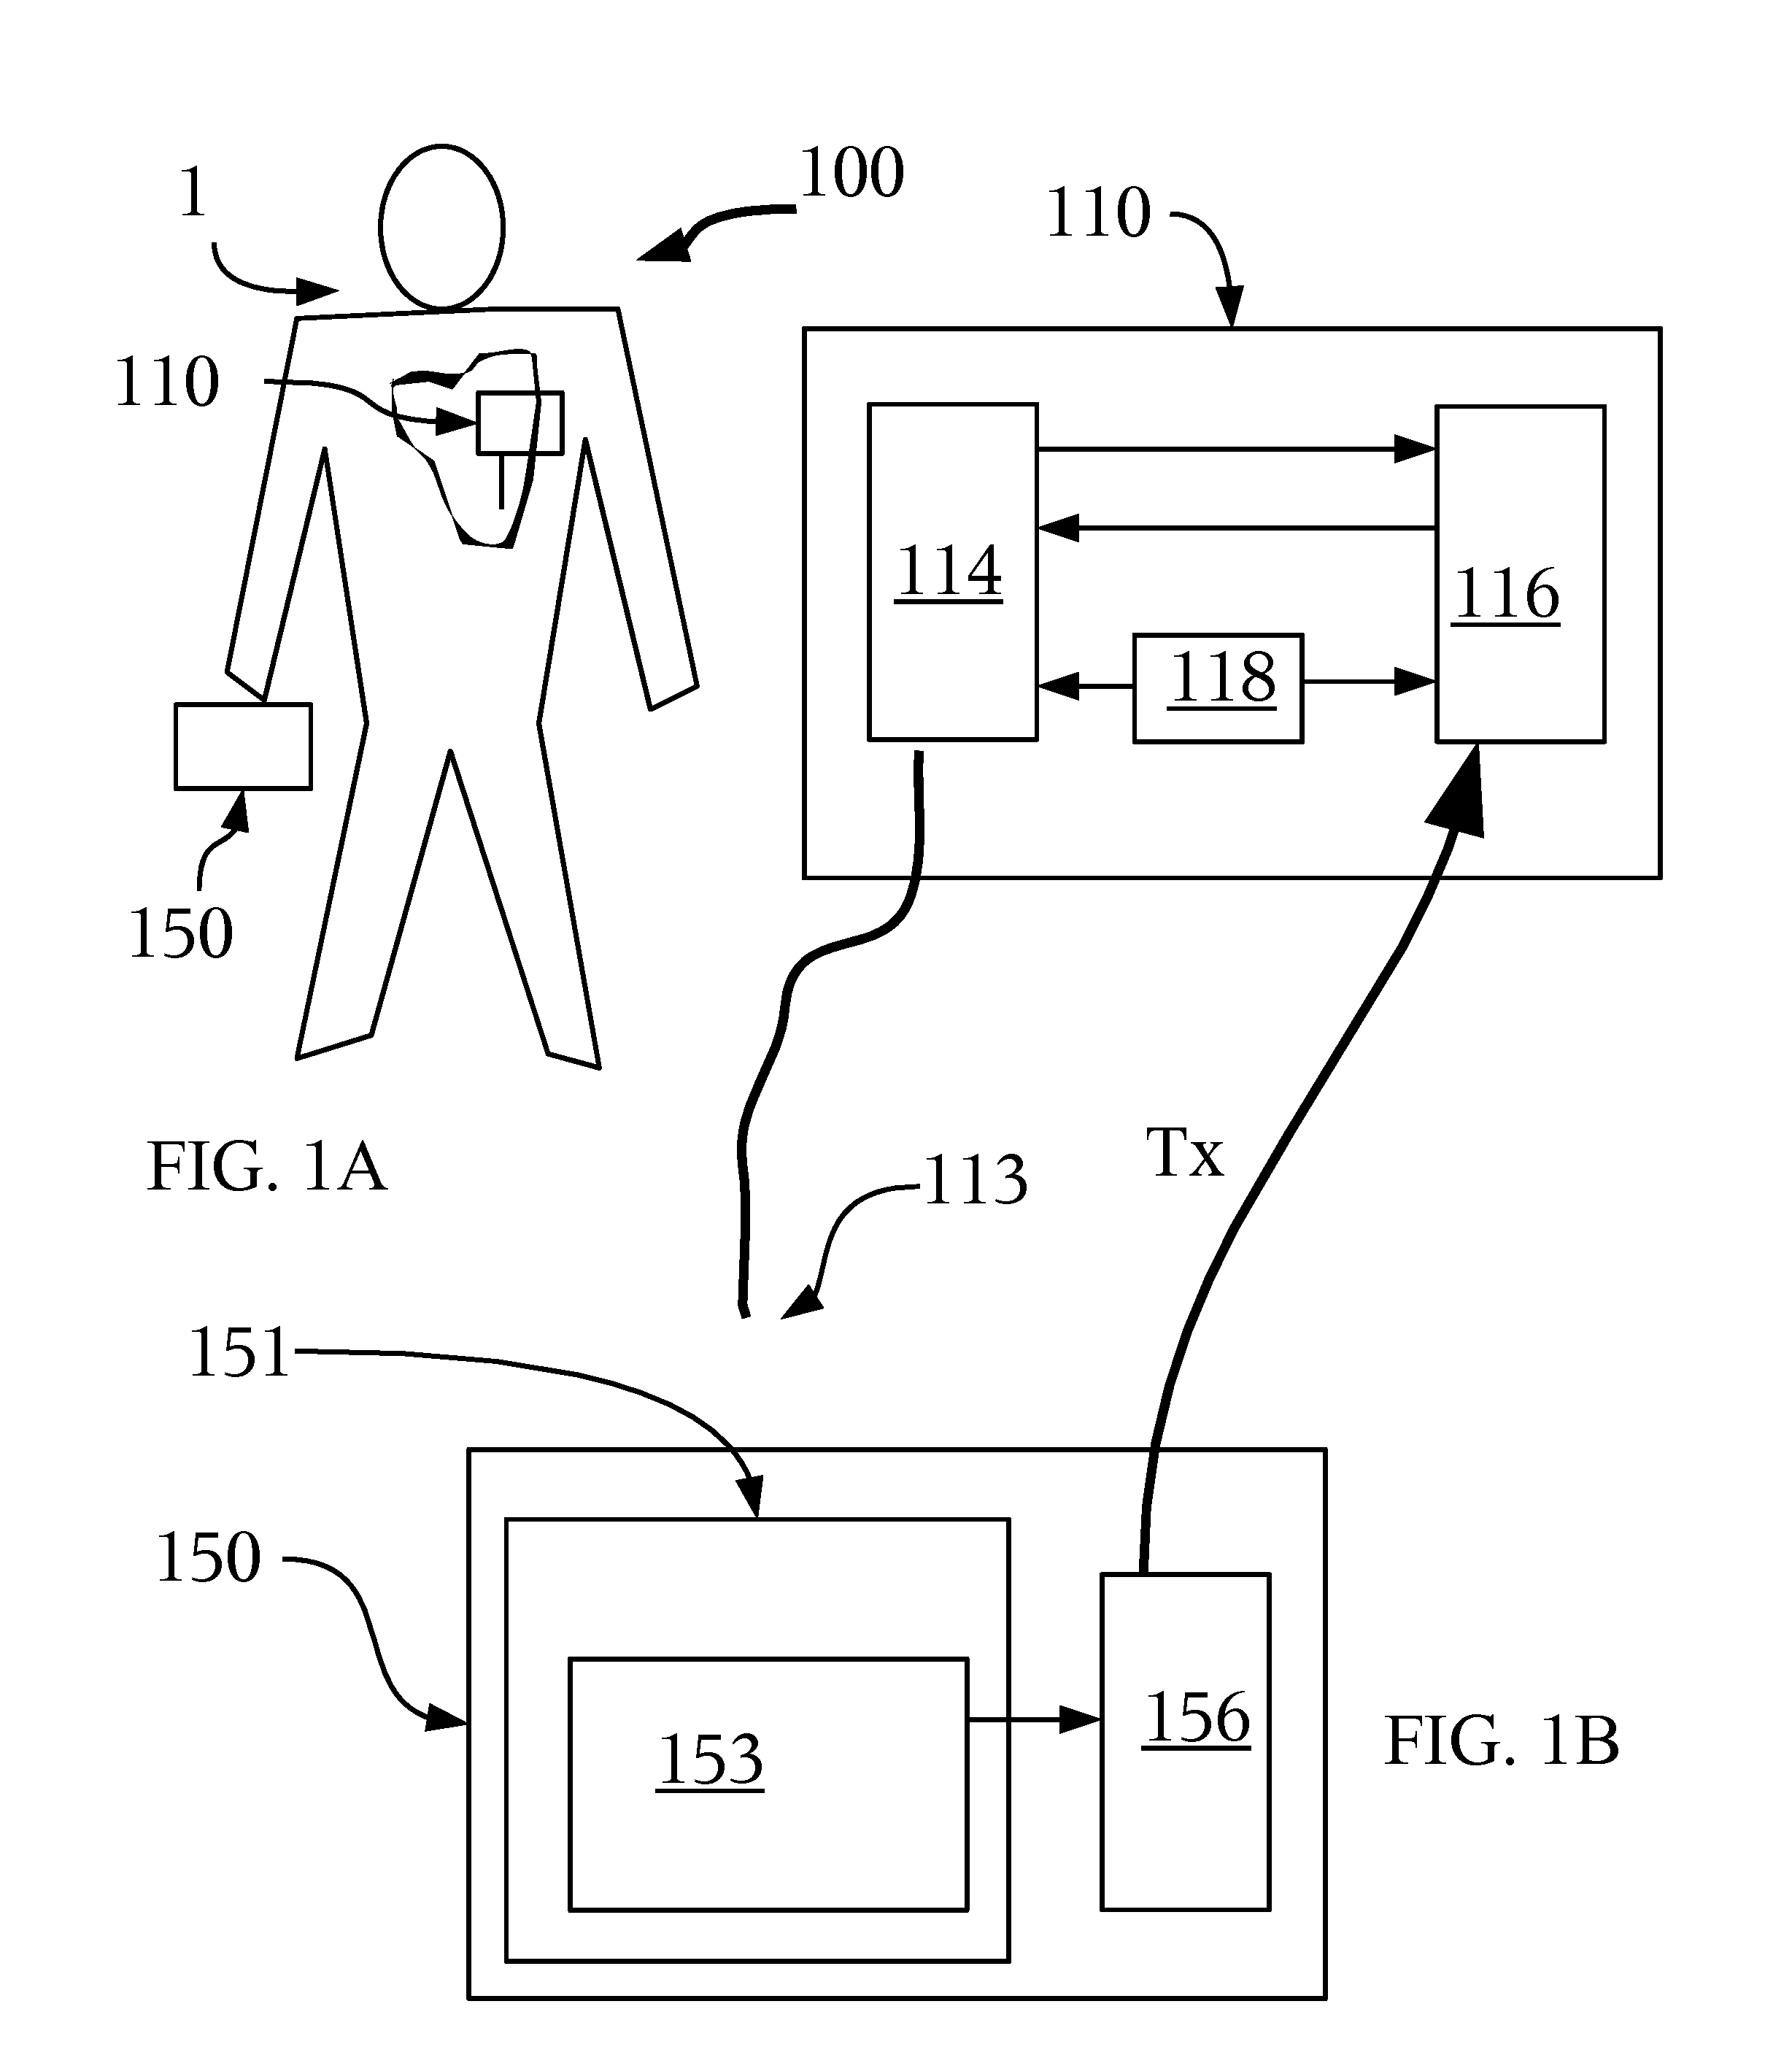 Method and Apparatus for Control of Pacemakers